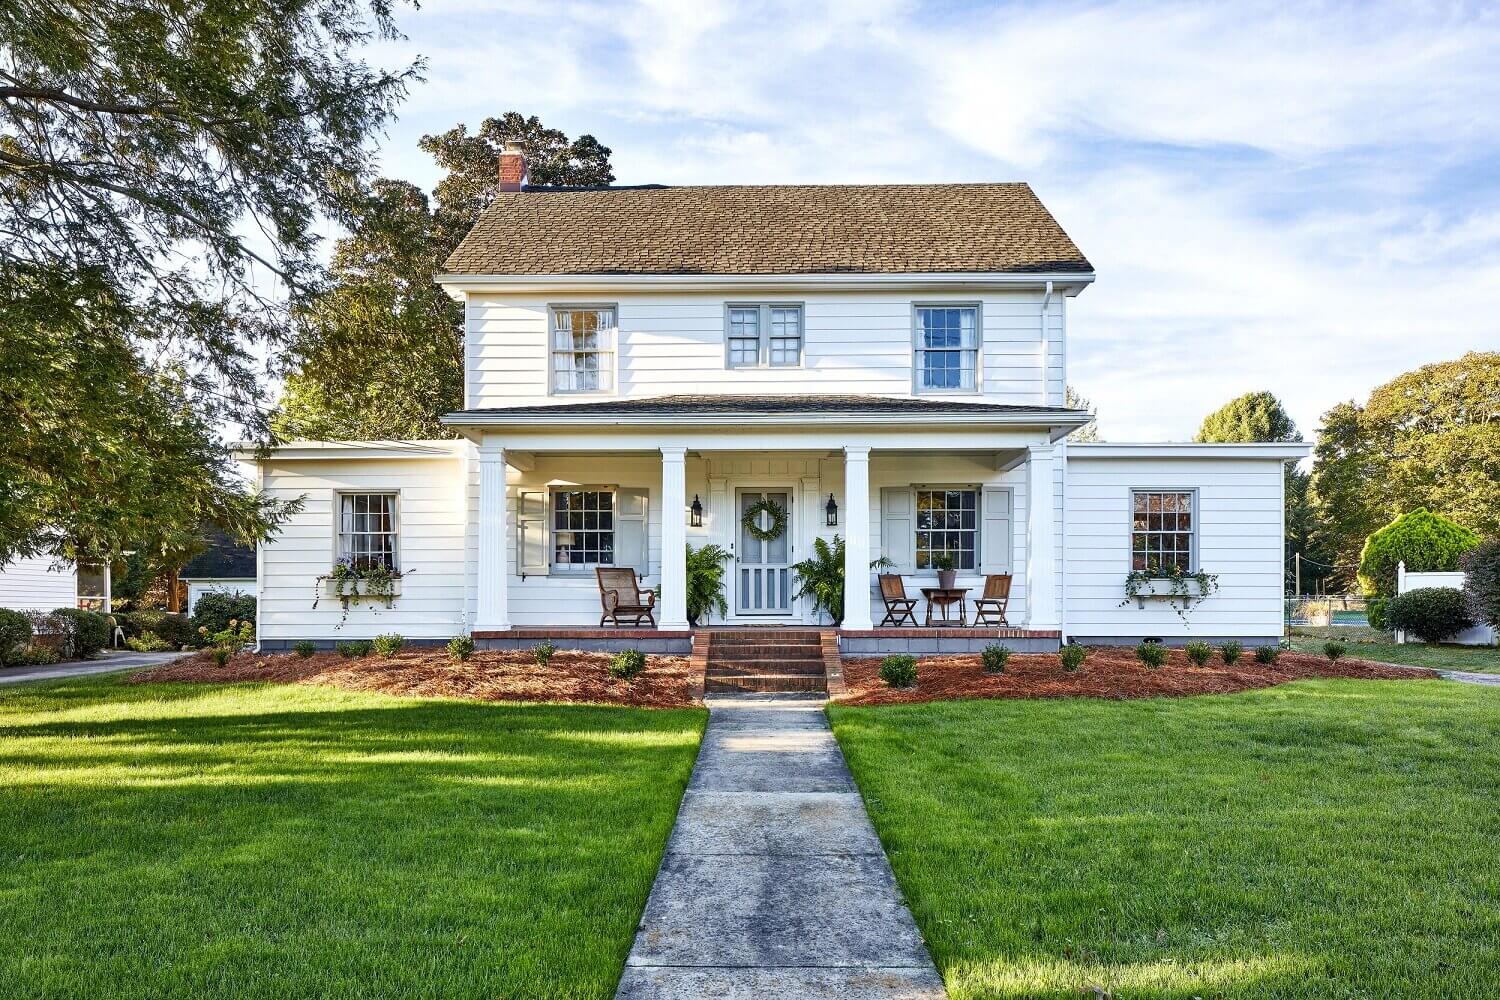 A1924ColonialRevivalFilledWithCharmandThrift StoreFinds TheNordroom13 A 1924 Colonial Revival Filled With Charm and Thrift-Store Finds